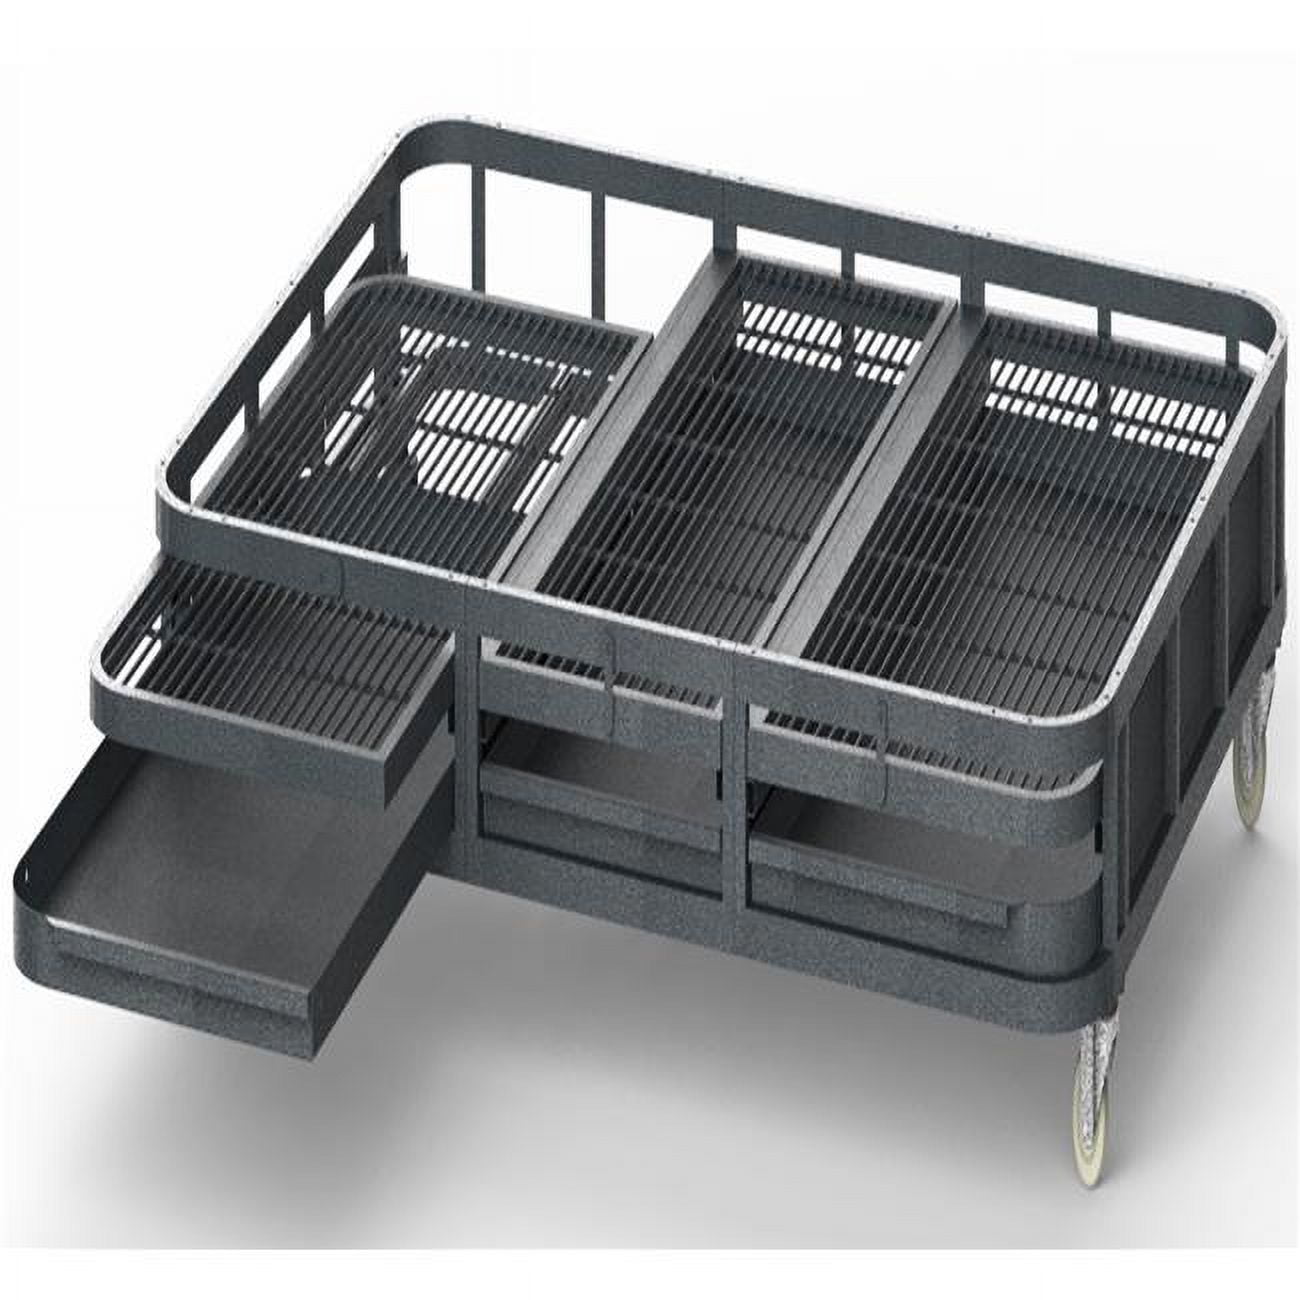 Picture of A&E Cage WI6262BS Black Easy Glide Wheel Slide Trays & Grates